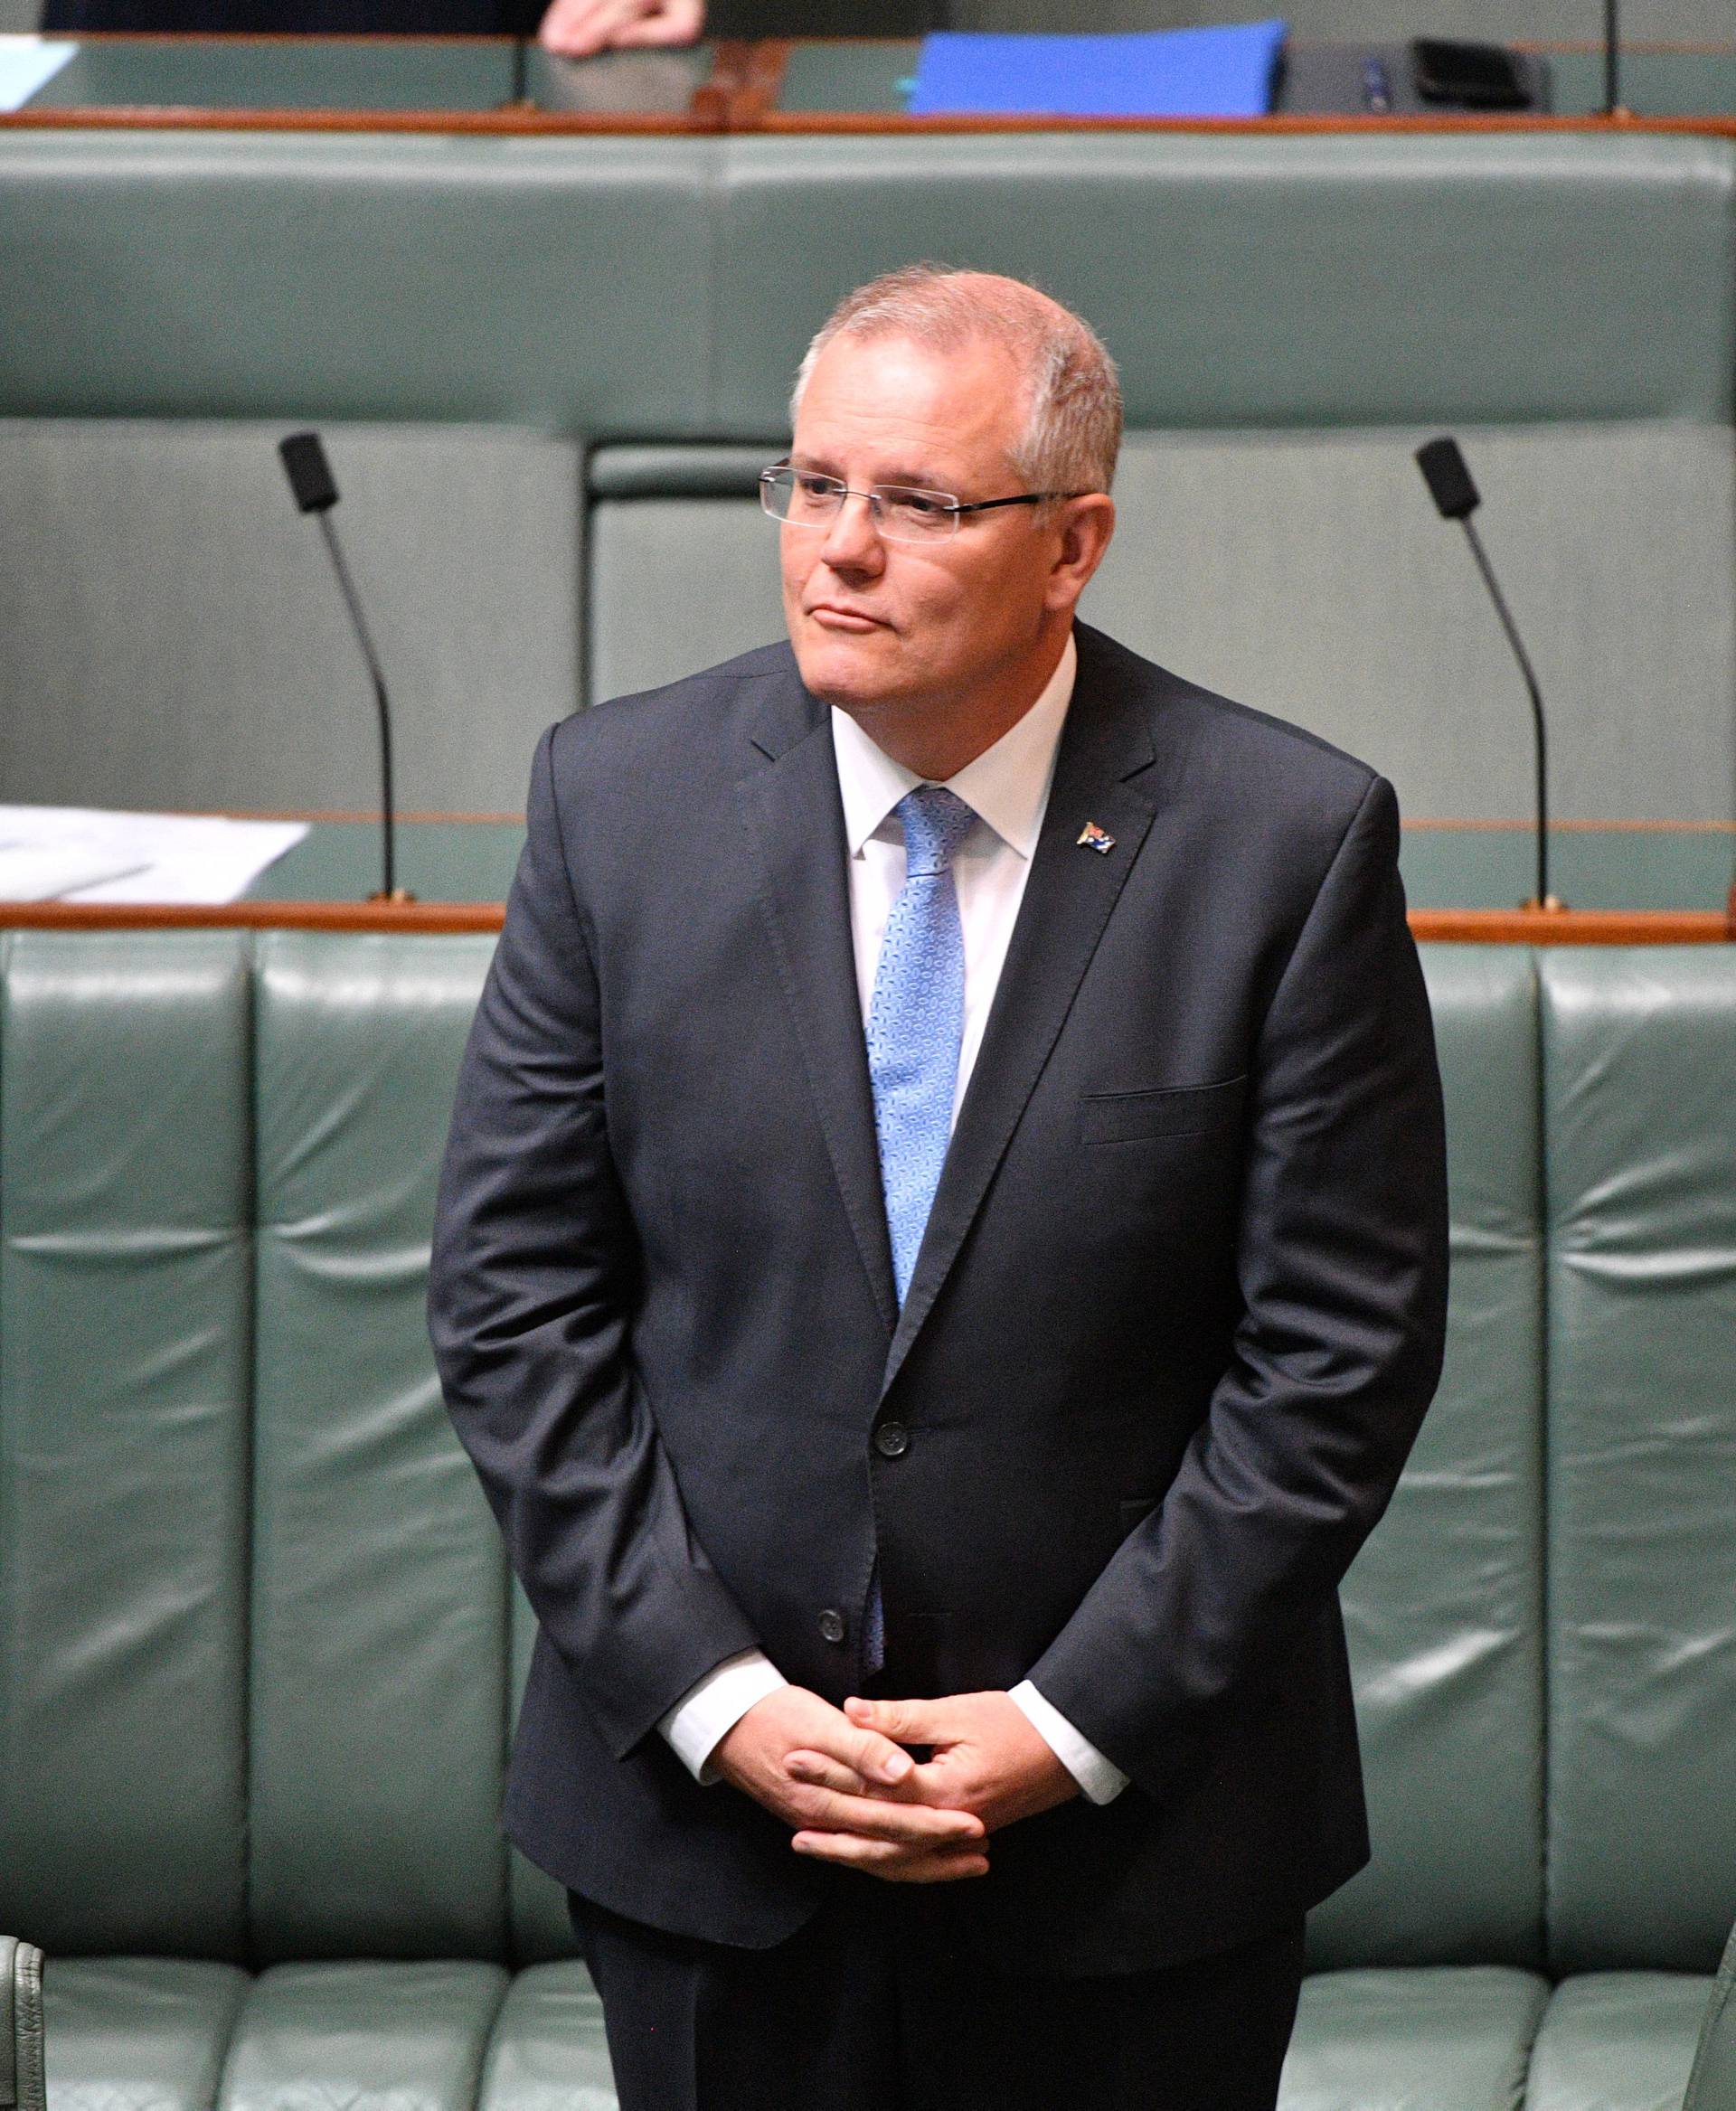 Australia's Prime Minister Scott Morrison stands before delivering the National Apology in Canberra